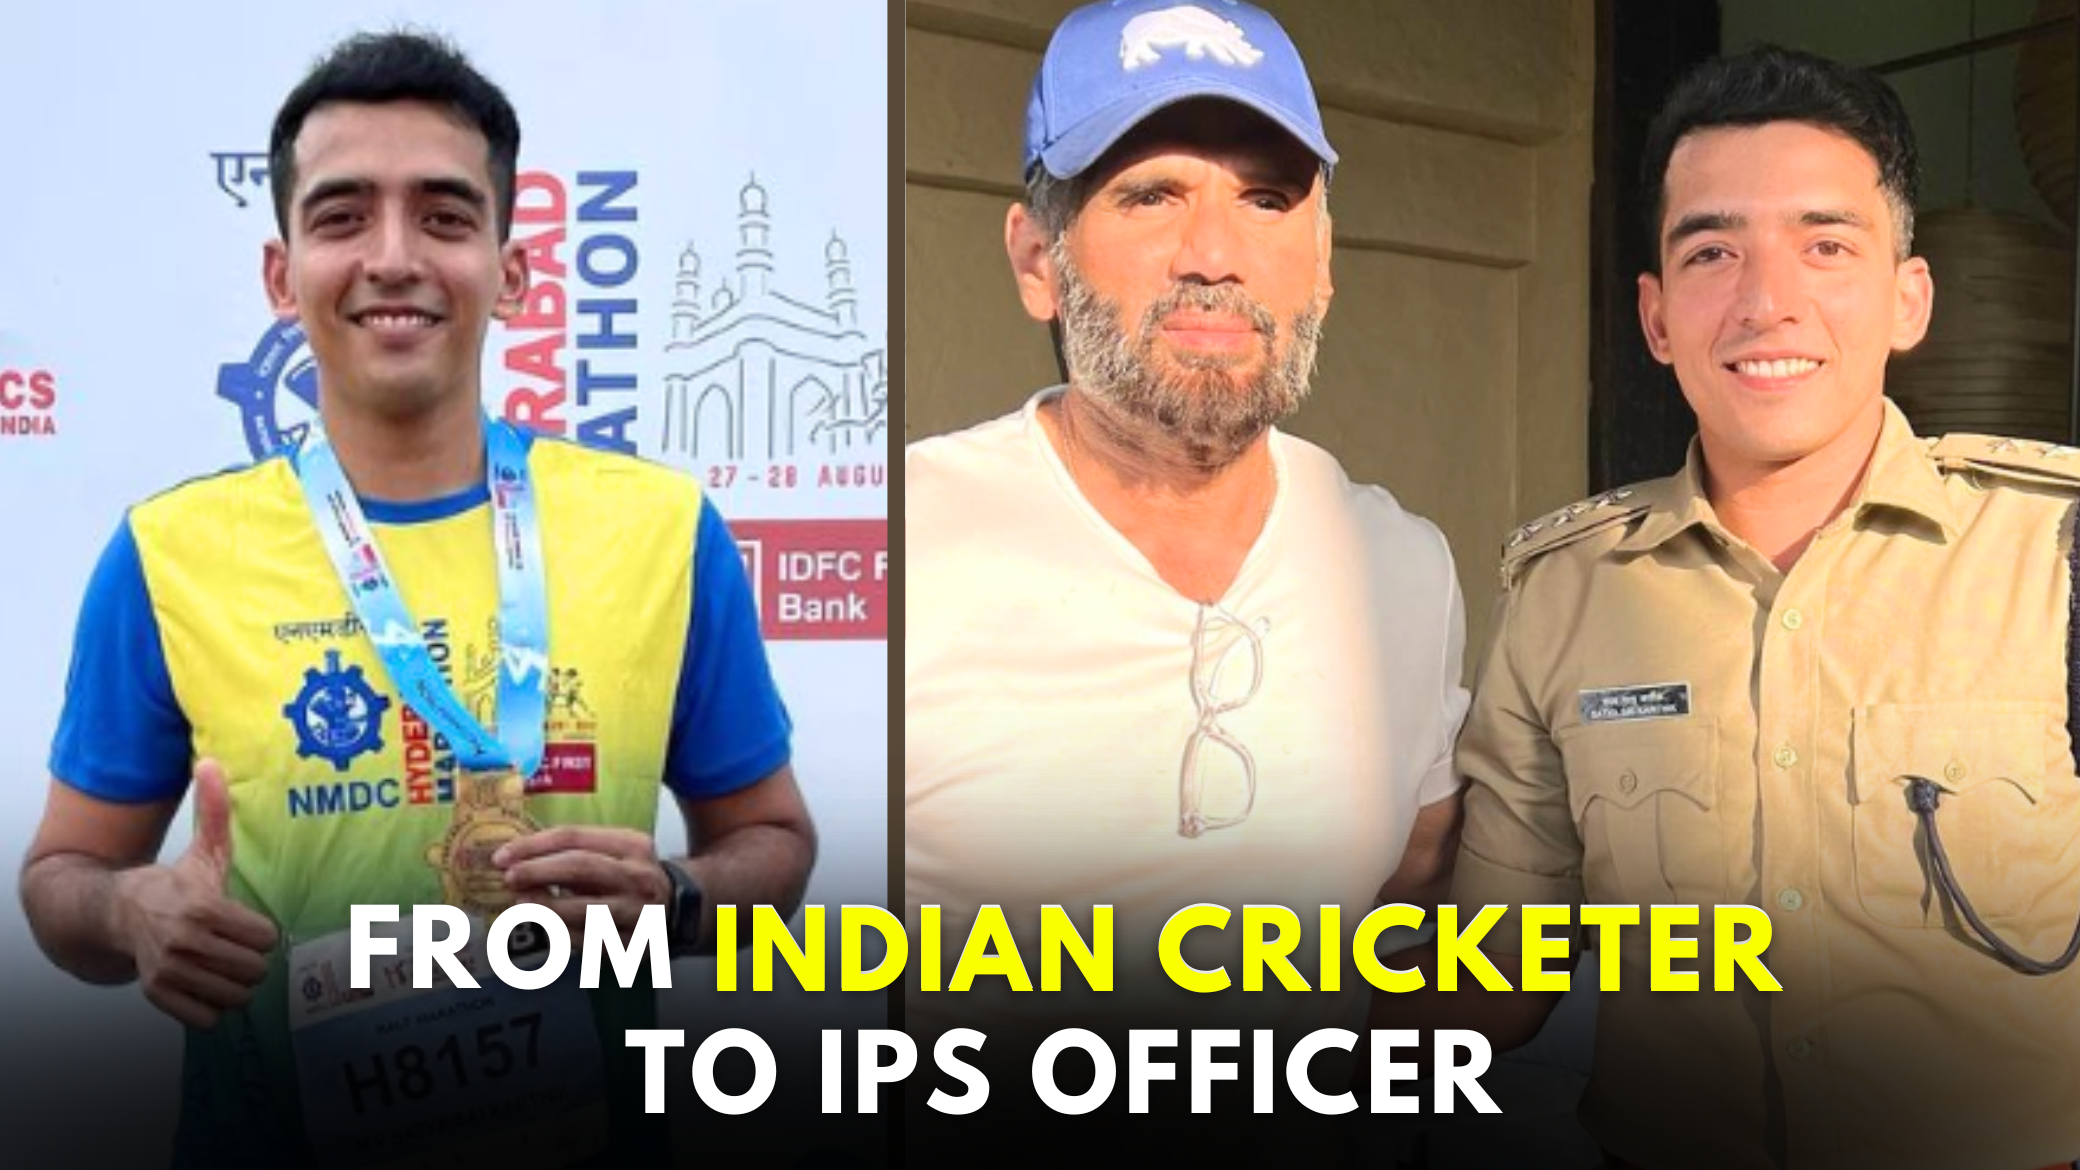 Karthik Madhira IPS Biography: From Indian Cricketer to IPS Officer